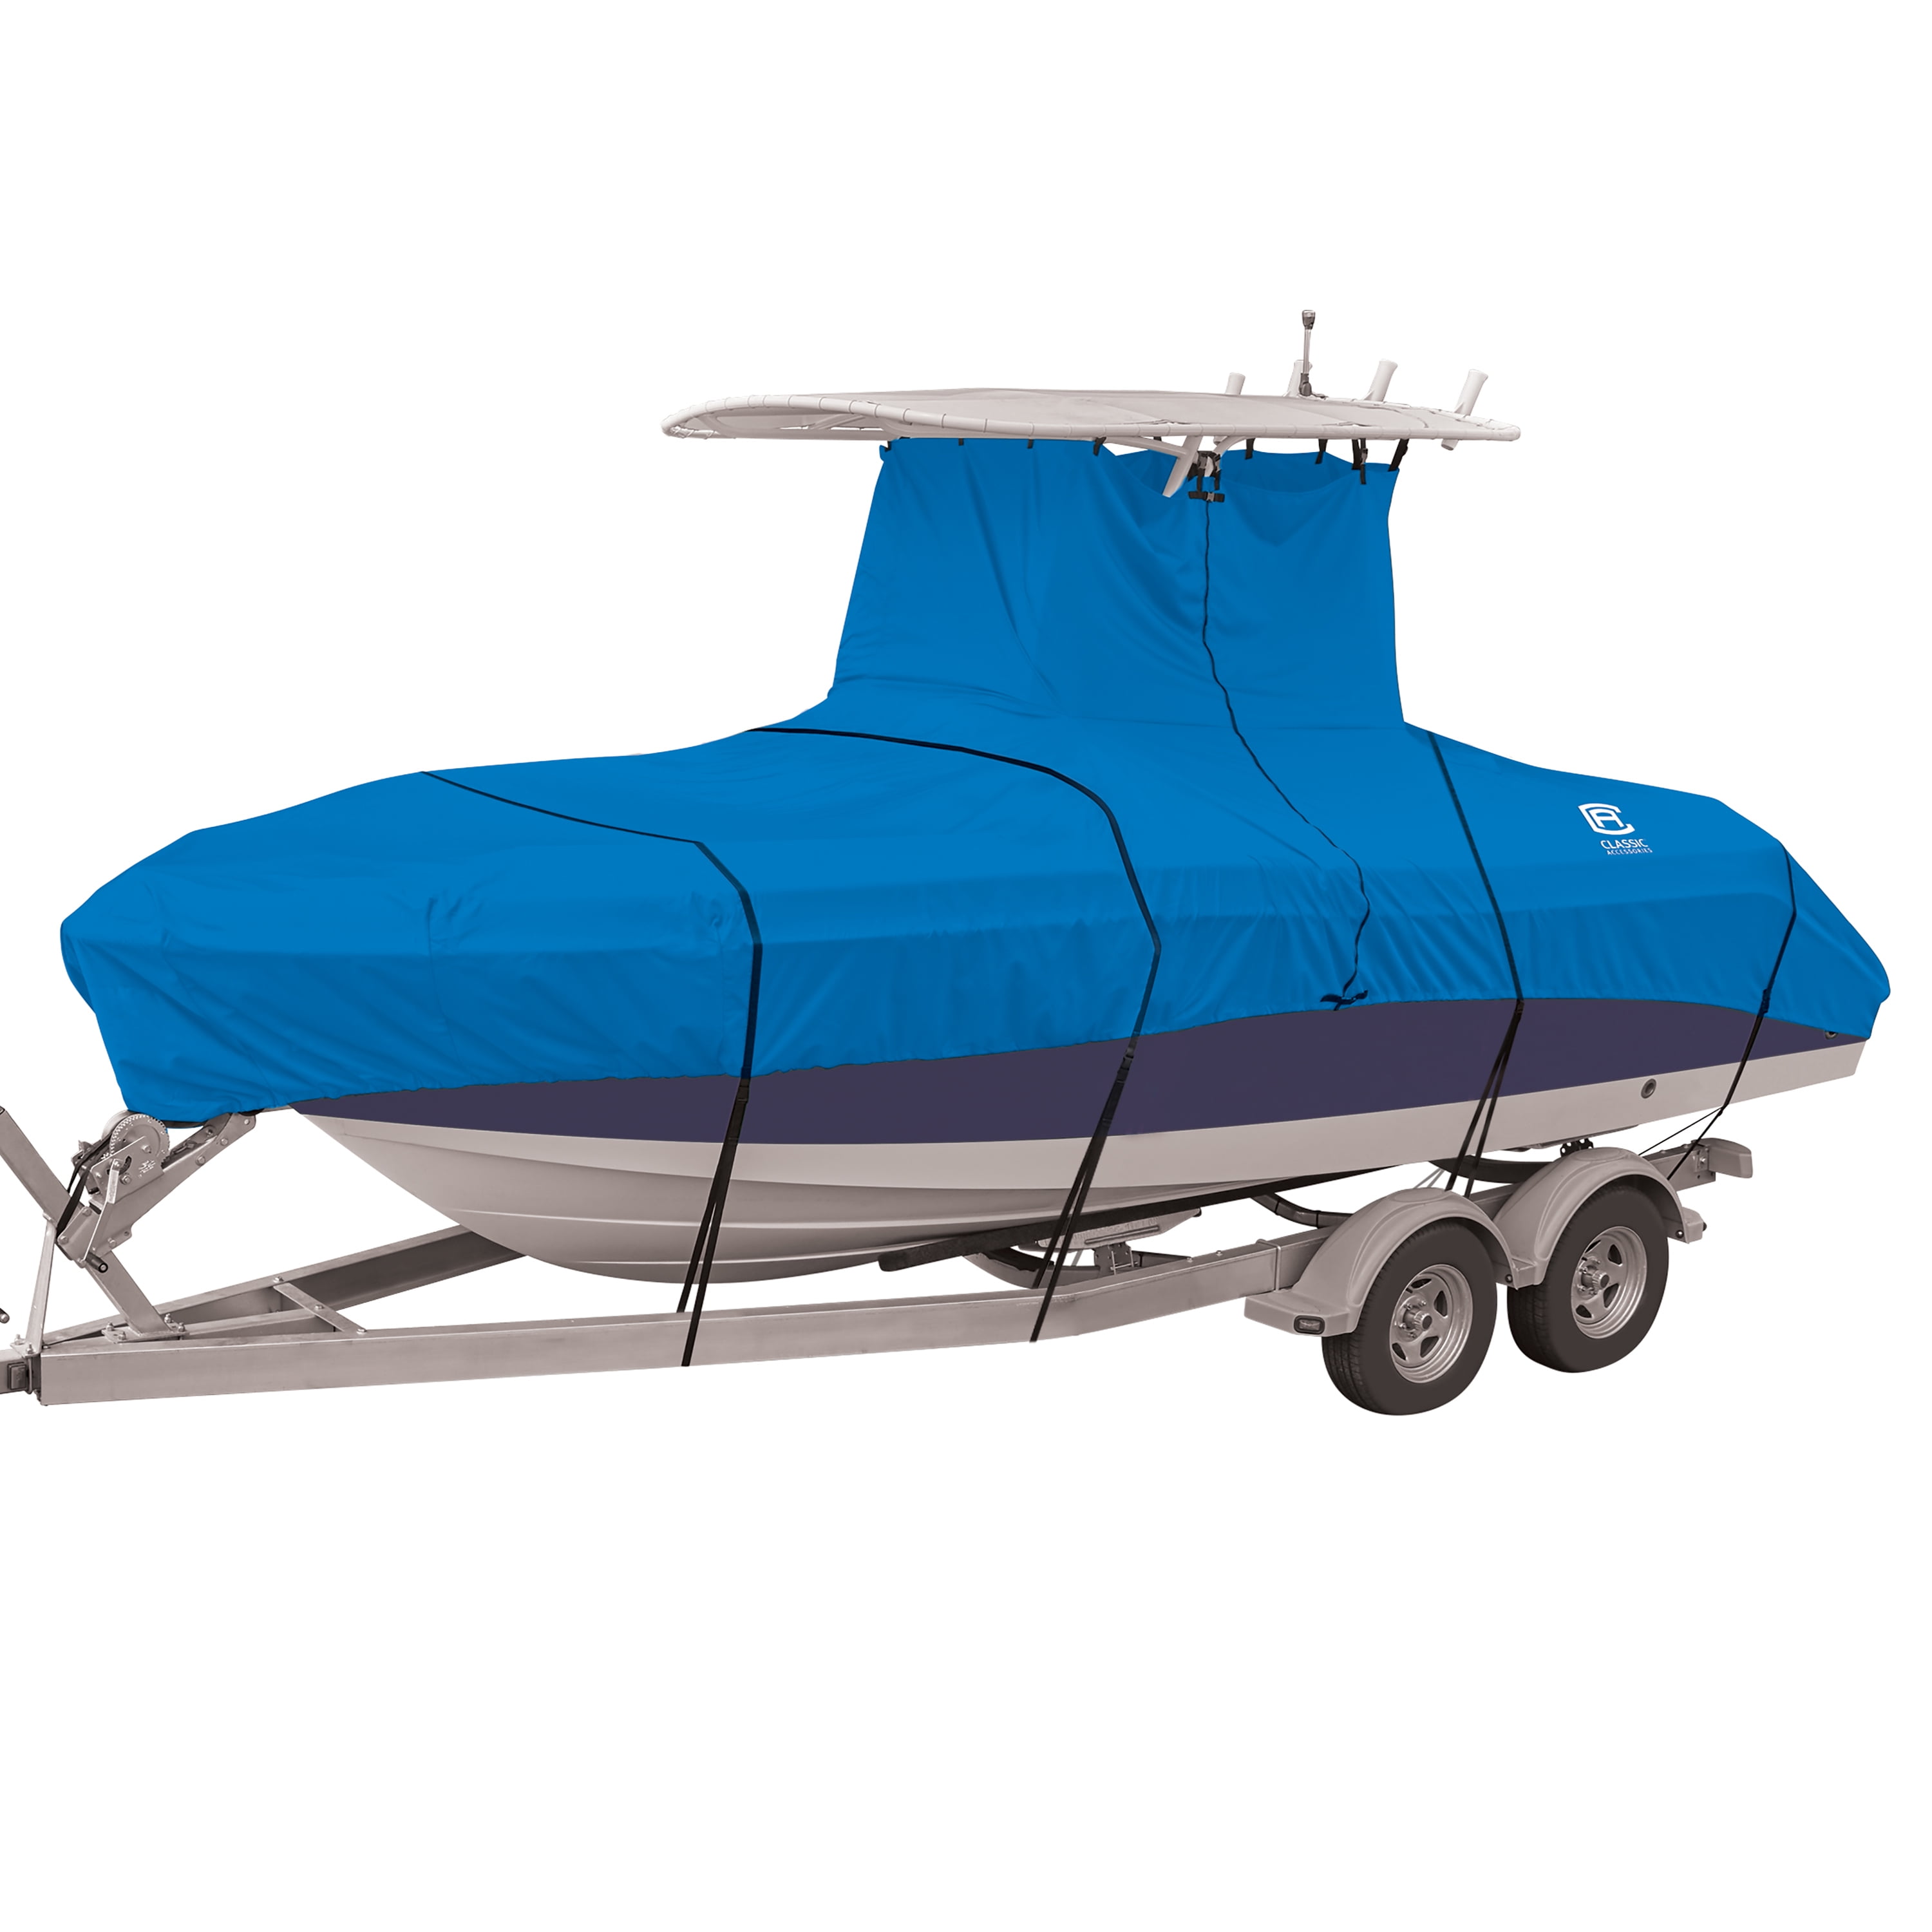 Stellex Blue All Seasons Boat Cover by Classic Accessories at